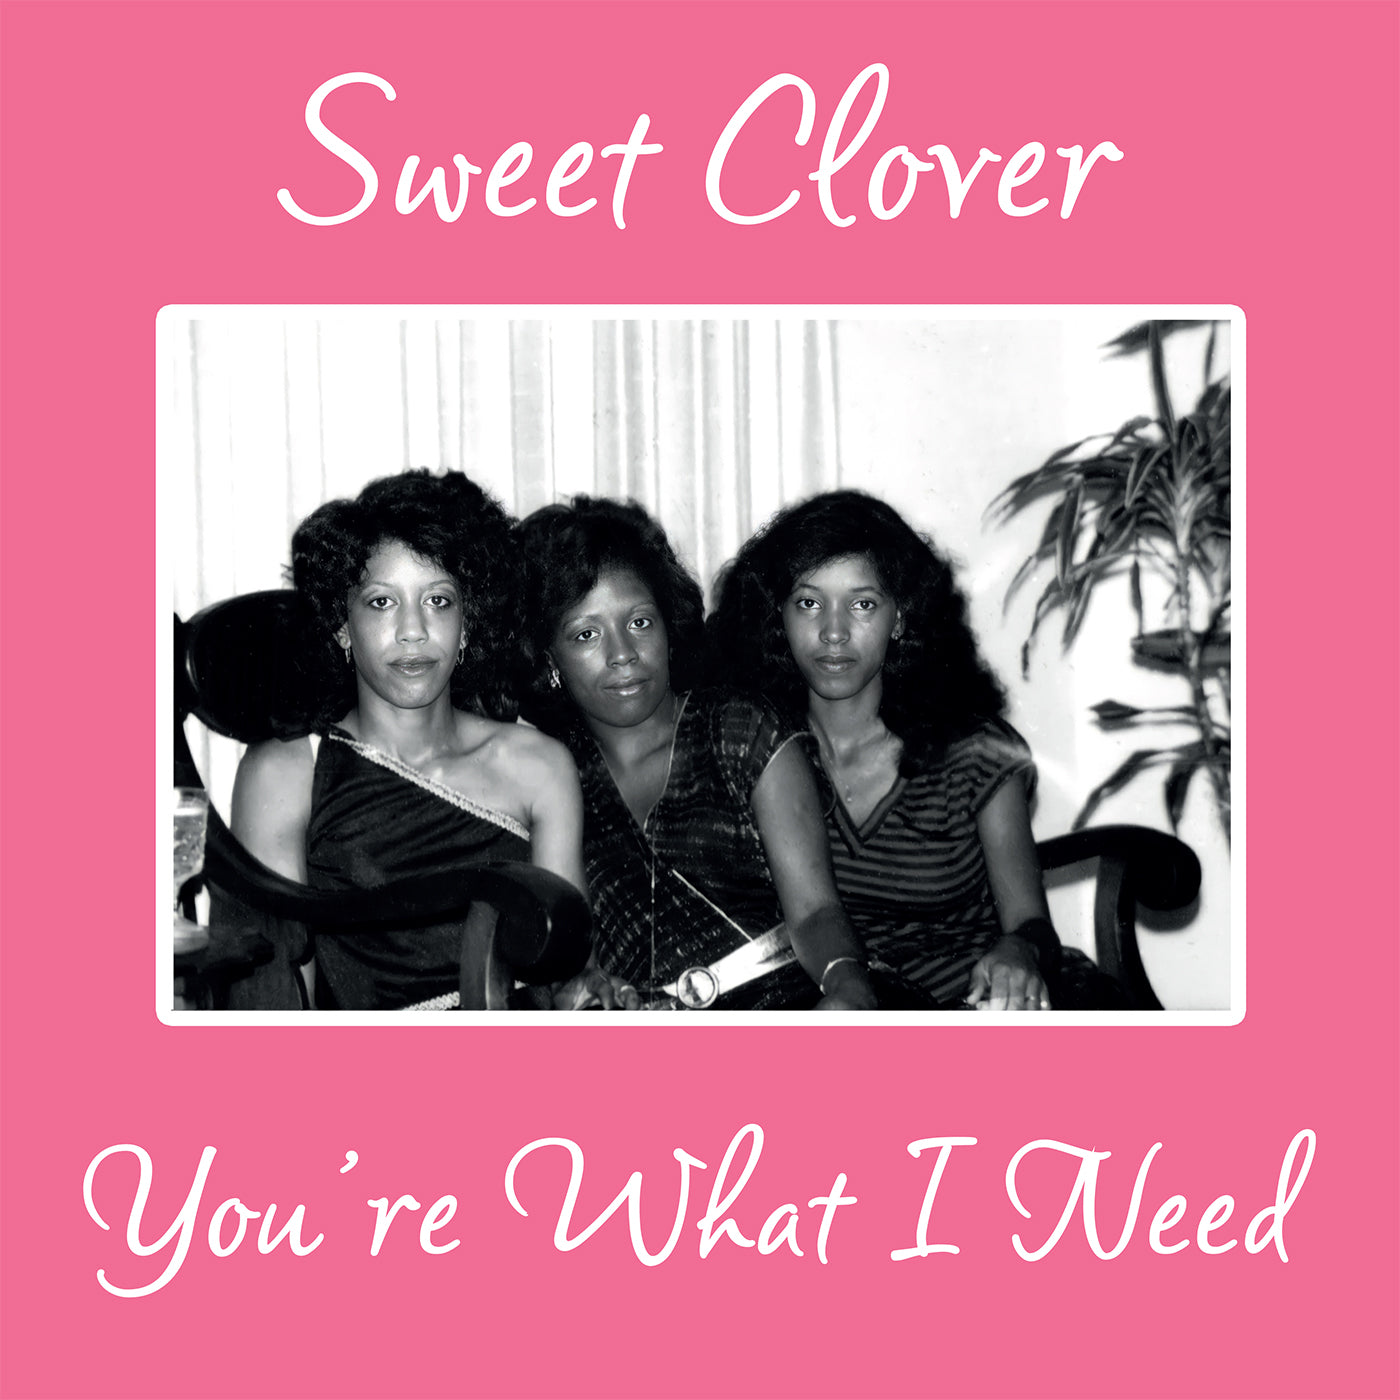 SWEET CLOVER - You're What I Need - 12" - Vinyl